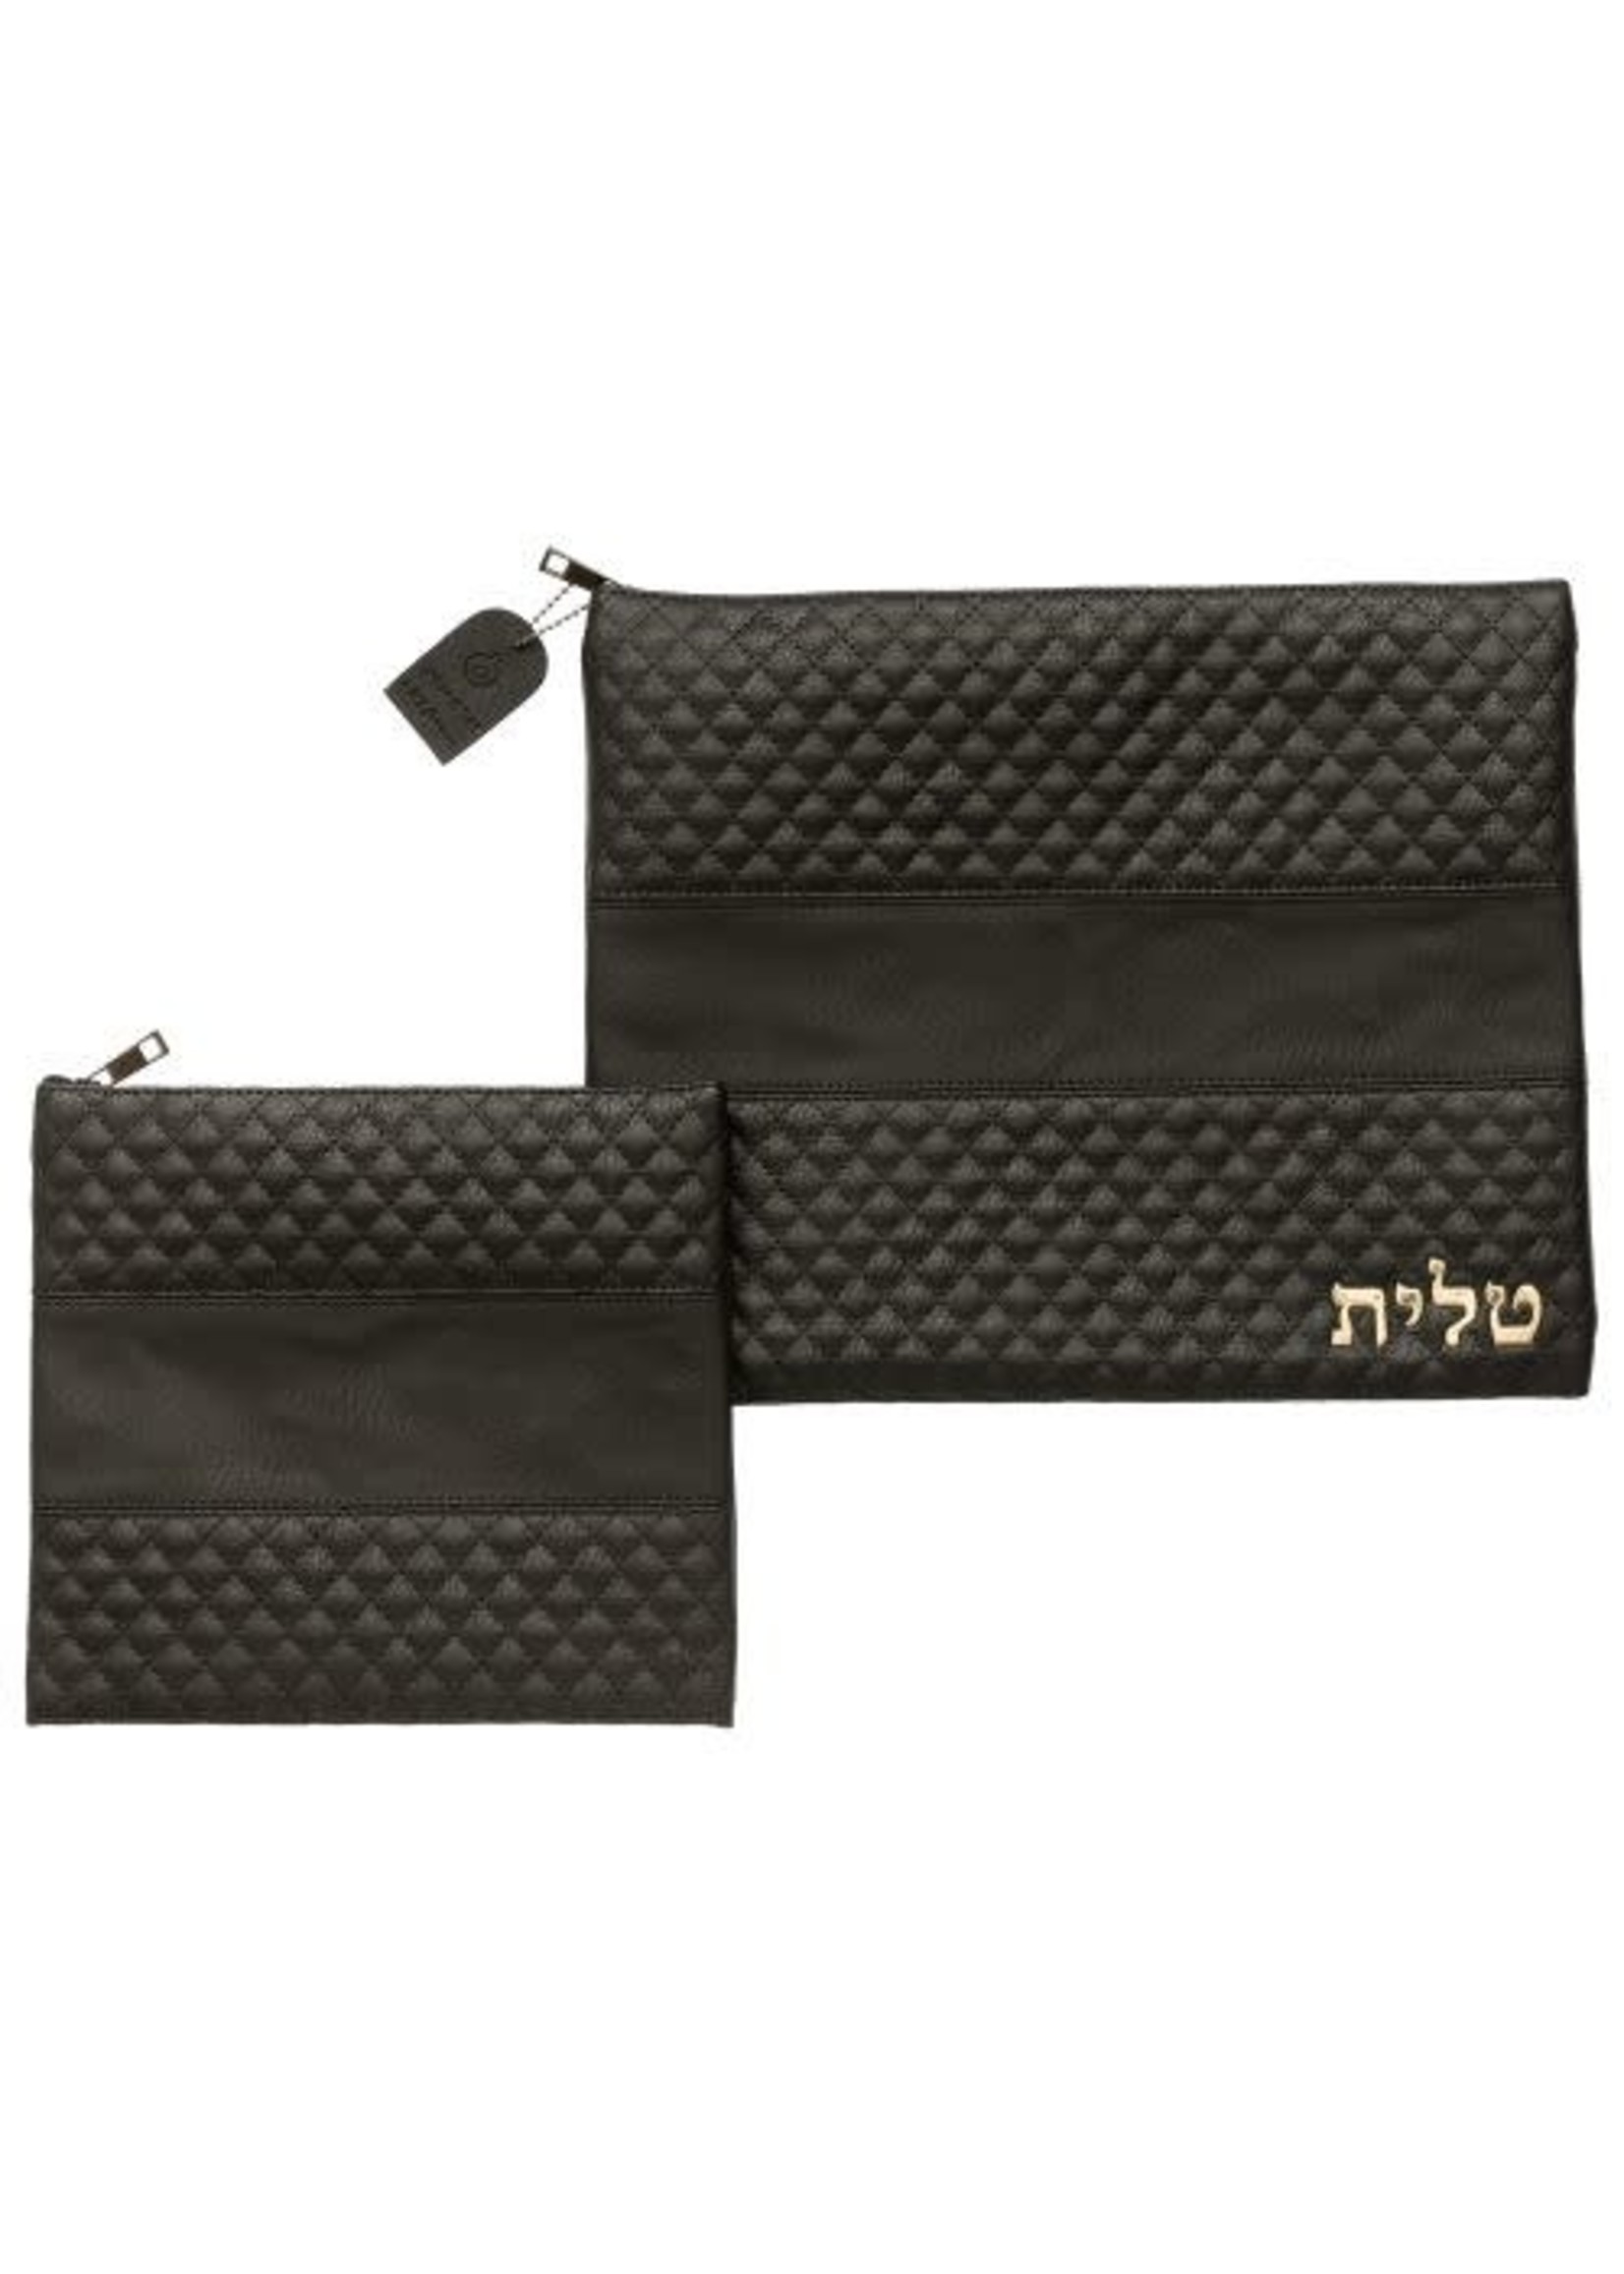 LEATHER LIKE TALIT AND TEFILIN BAG BLACK WITH GOLD